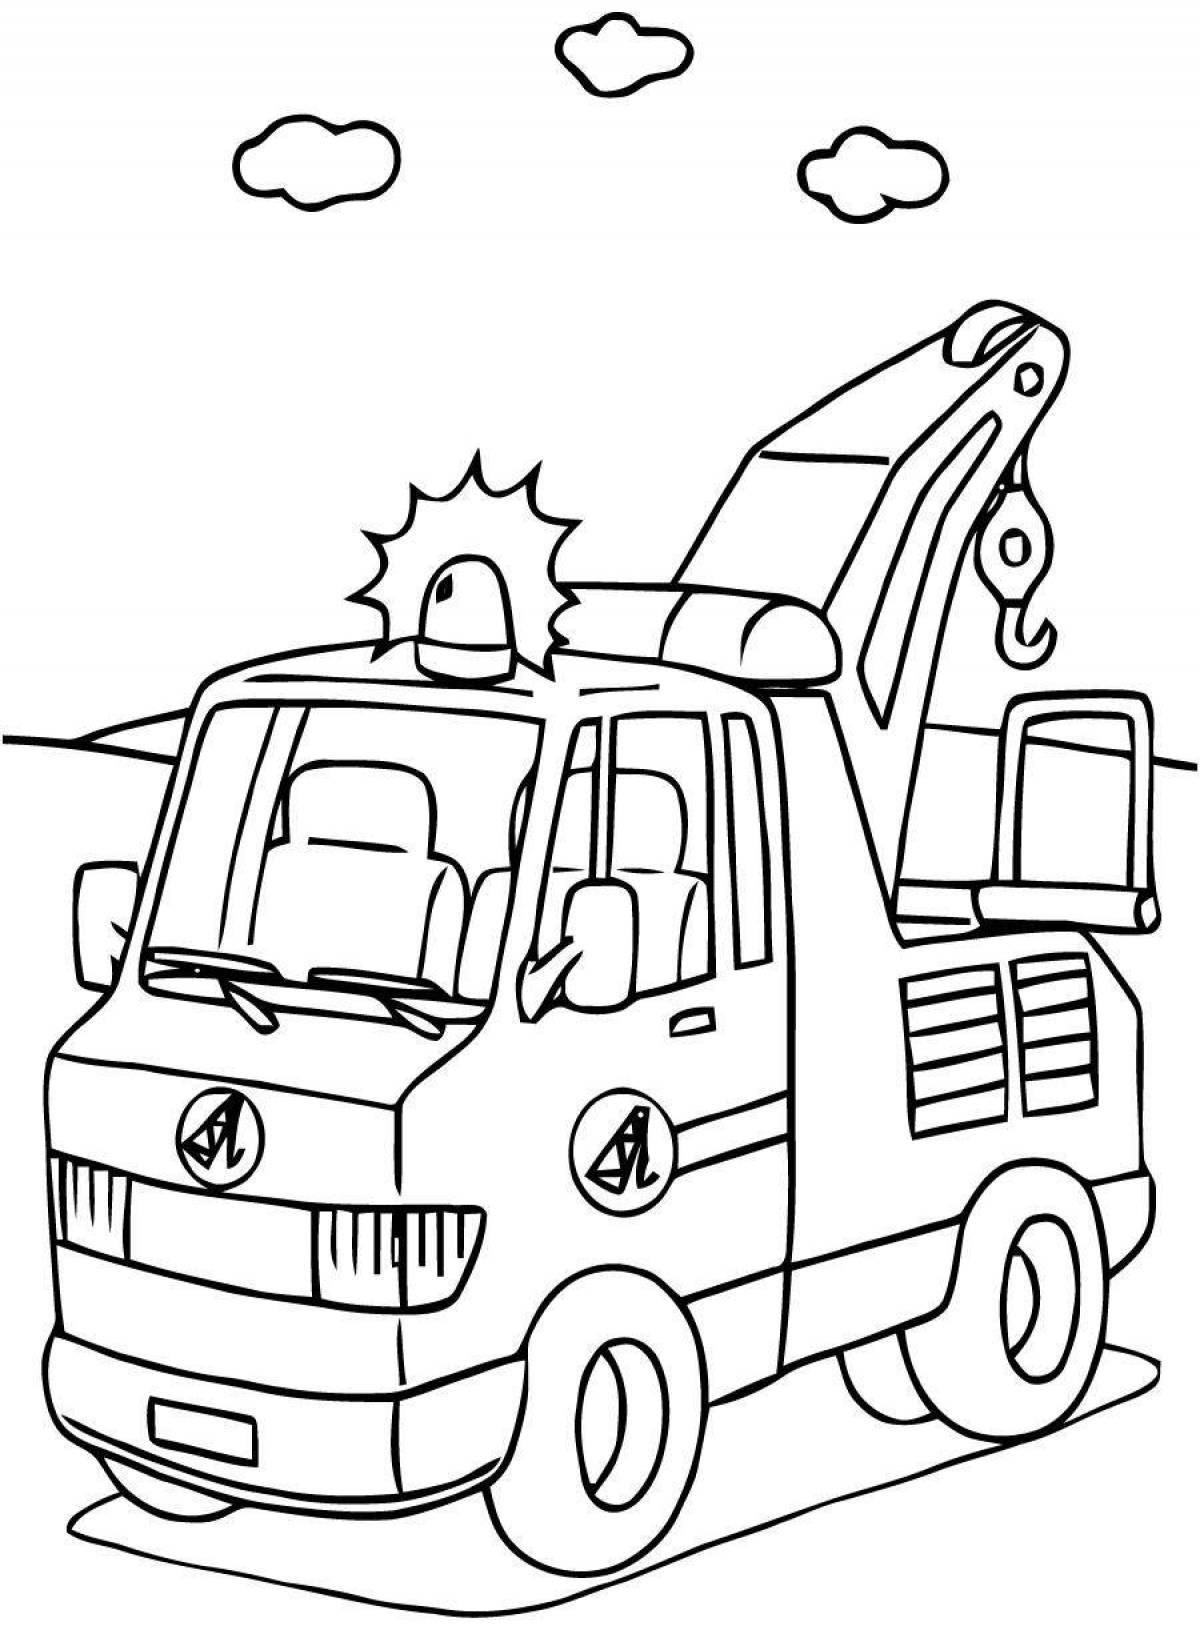 Colorful car assistant coloring page